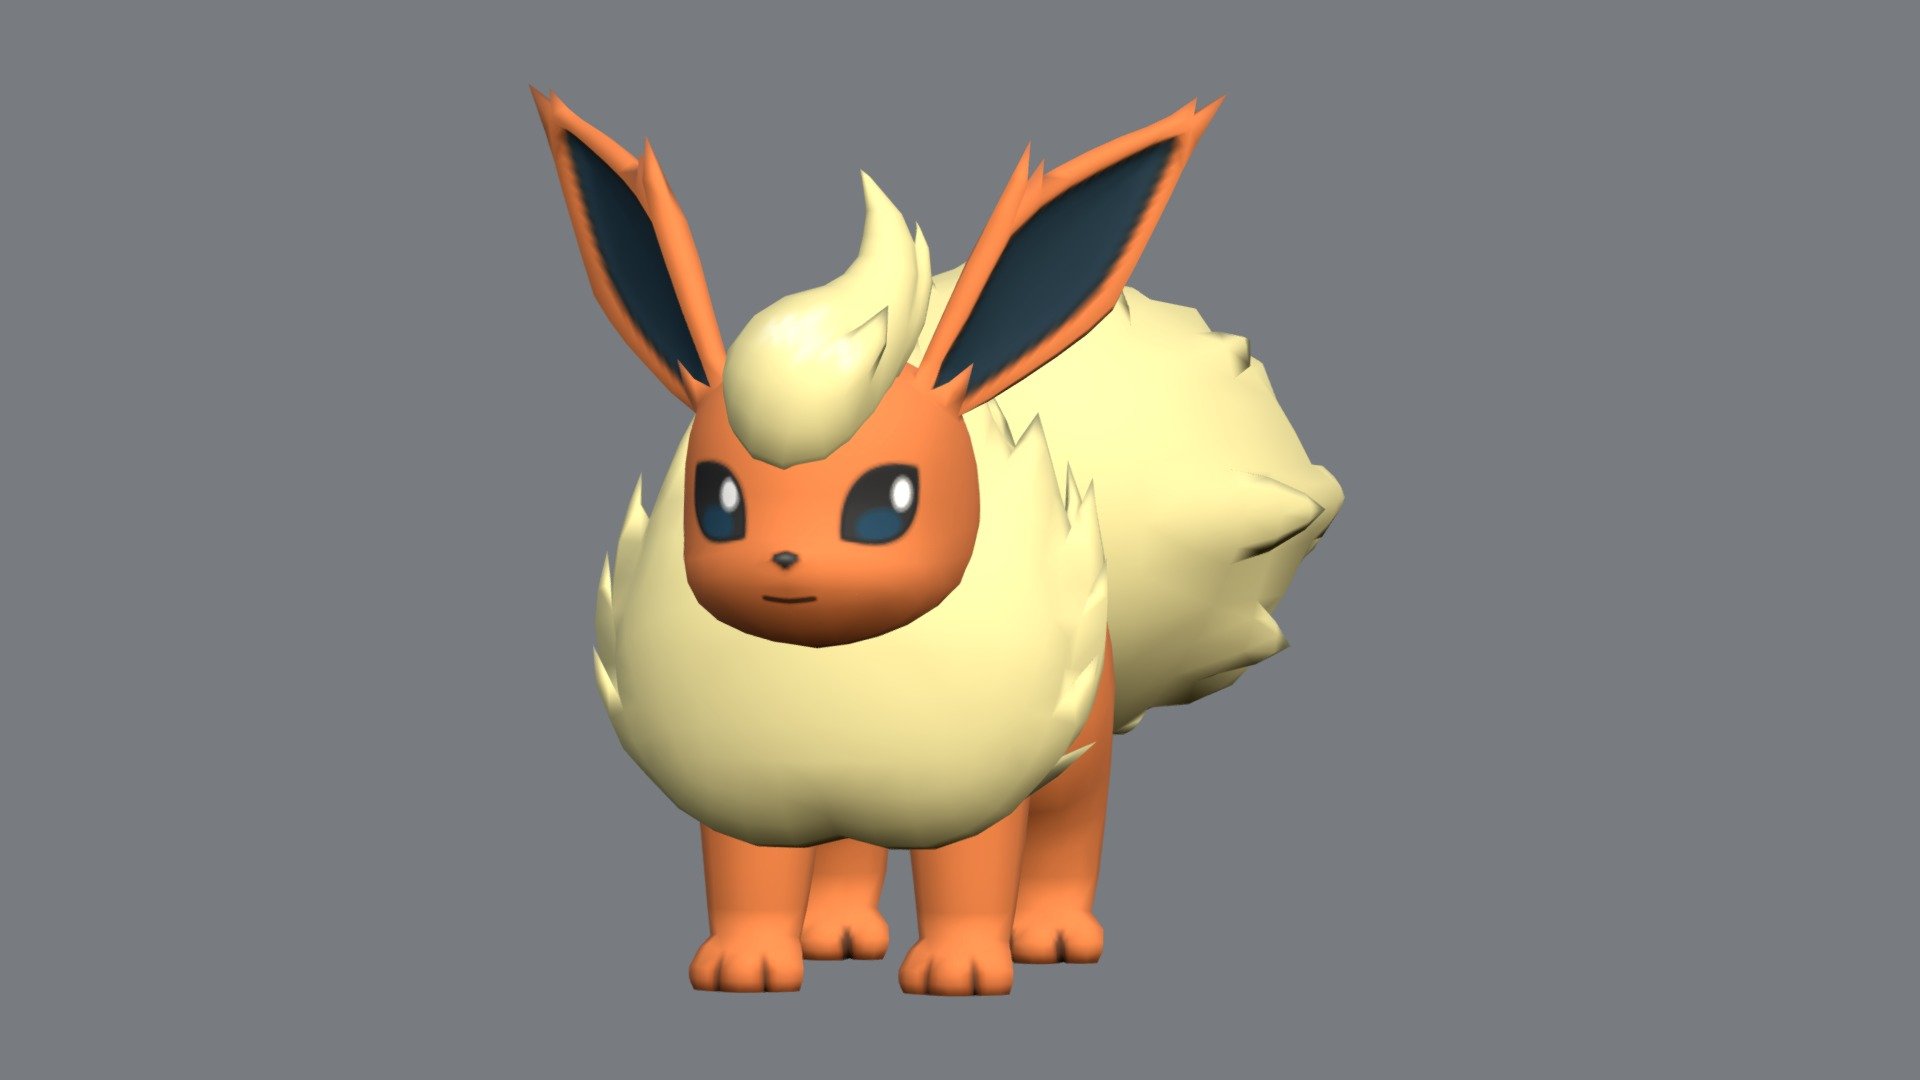 Flareon is a mammalian, quadrupedal Pokémon covered in short, reddish-orange fur. It has long ears with black interiors, dark eyes, and a small black nose. There are three small toes and a yellow paw pad on each foot. Fluffy yellow fur forms a small tuft on its head, as well as its bushy tail and a mane around its chest and neck.

Flareon's body temperature is caused by its internal flame sac, and rises when it is excited. If its body gets too hot, it will fluff out the fur on its collar to cool down. Flareon stores and heats inhaled air in its flame sac, and then exhales it as fire with temperatures of around 3,100 °F (1,700 °C). Flareon's average body temperature is around 1,300-1,500 °F (700-800 °C), but it can reach 1,700 °F (900 °C). It is an omnivore that roasts either Berries or prey before consumption. Flareon has a curious personality, and is mostly found in populated areas, rarely seen in the wilderness - Flareon - Download Free 3D model by drewsdigitaldesigns 3d model